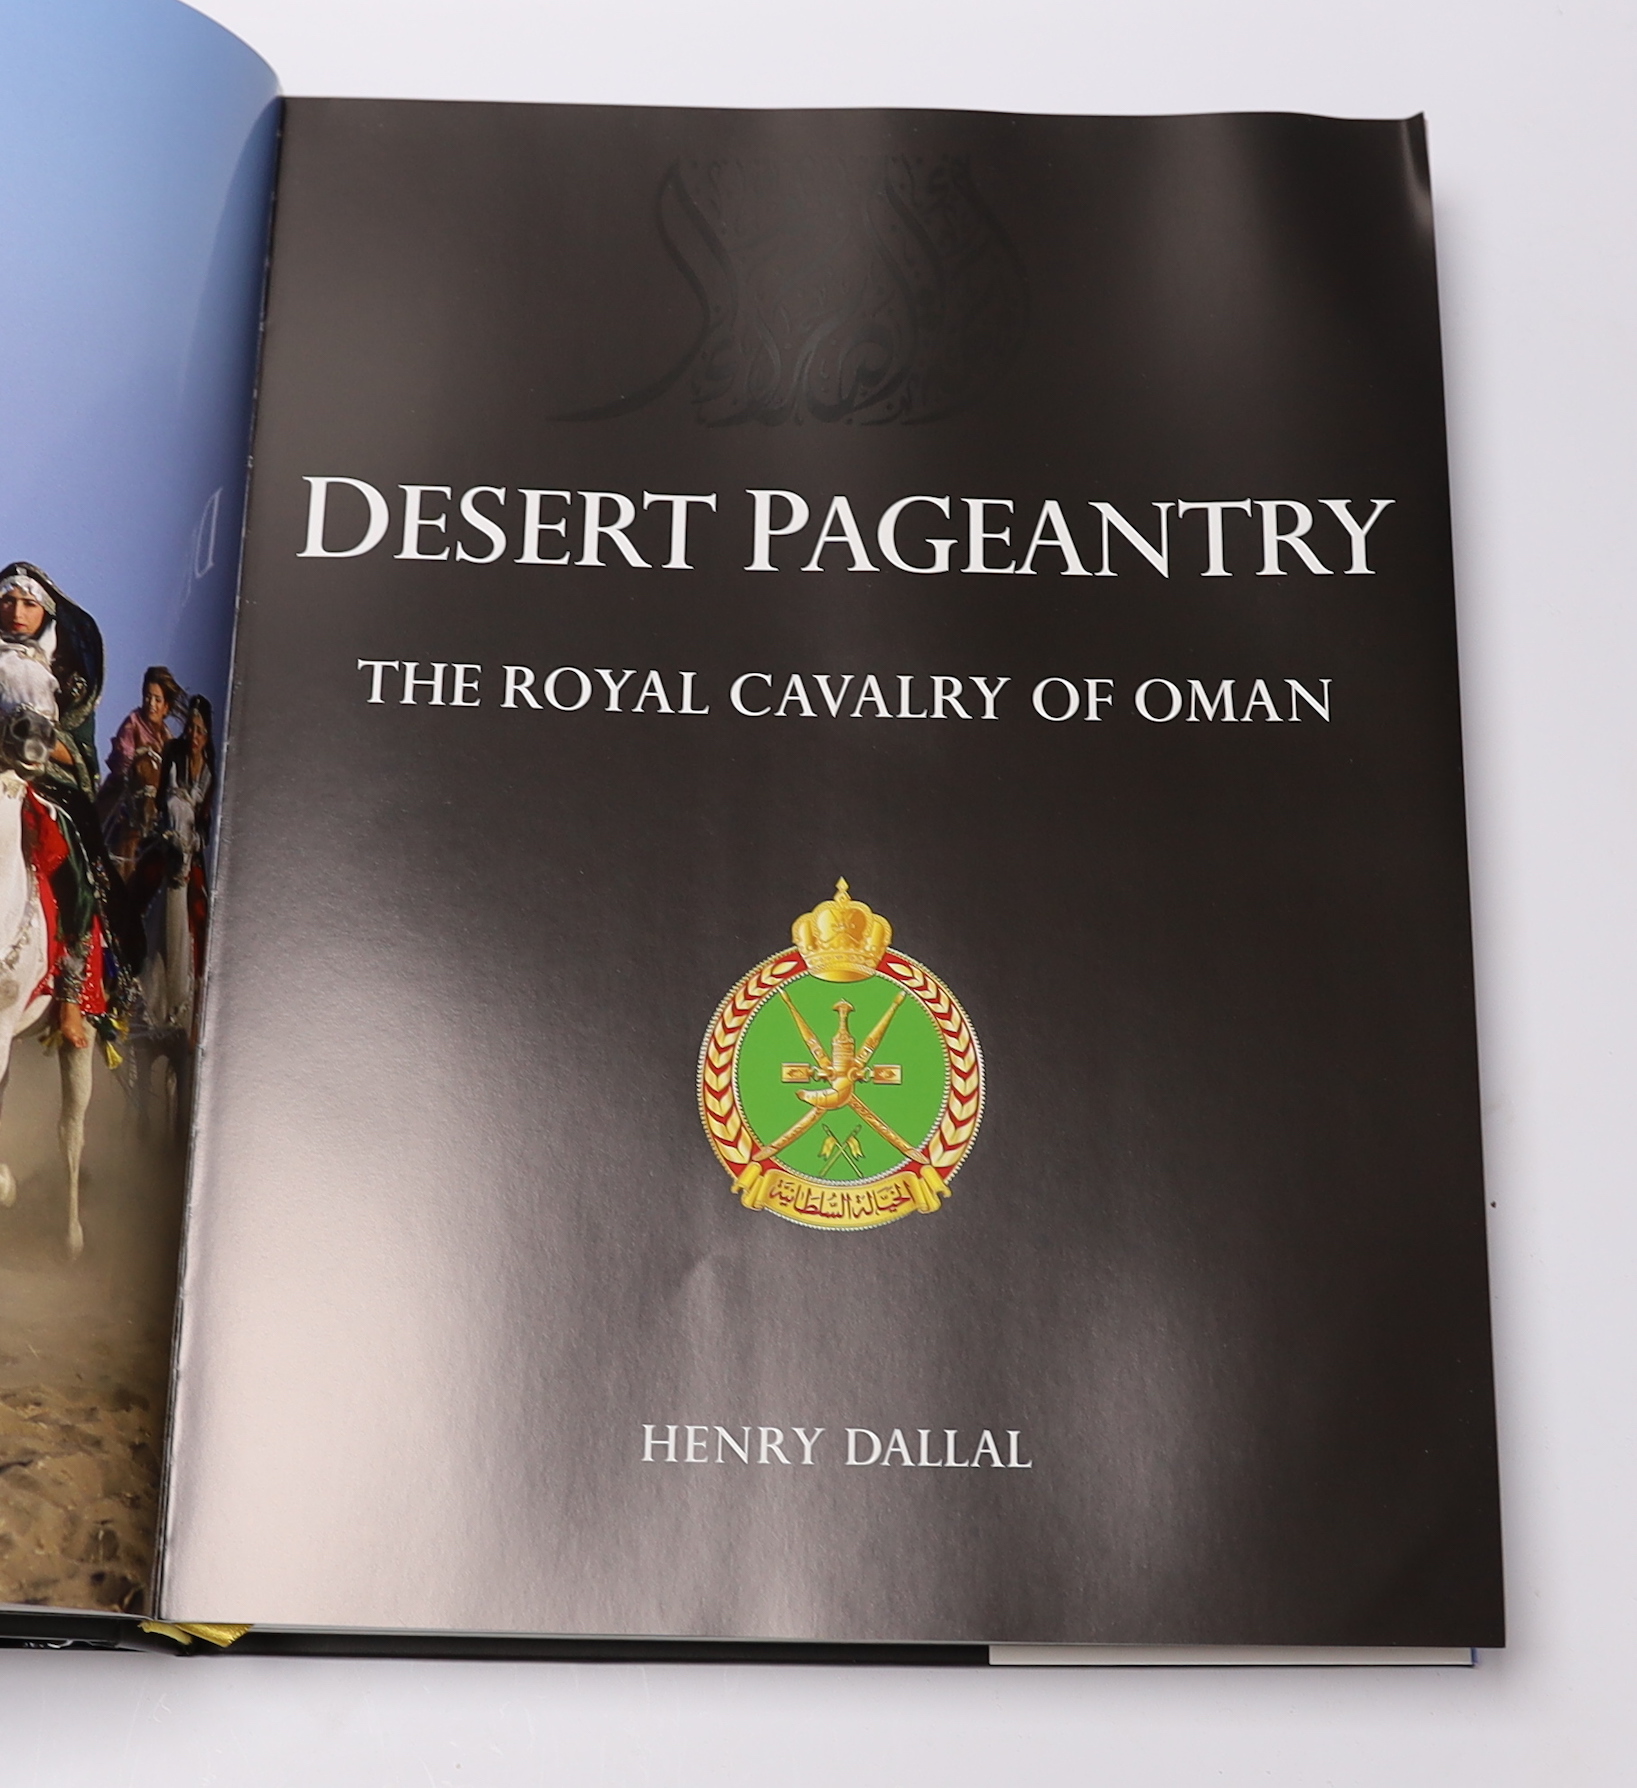 Dallal, Henry - Desert Pageantry: The Royal Cavalry of Oman, signed, folio, black pictorial boards gilt, in d/j, with original box, 2012, Note: Gold medal winner for the most outstanding design of the year, at the Indepe